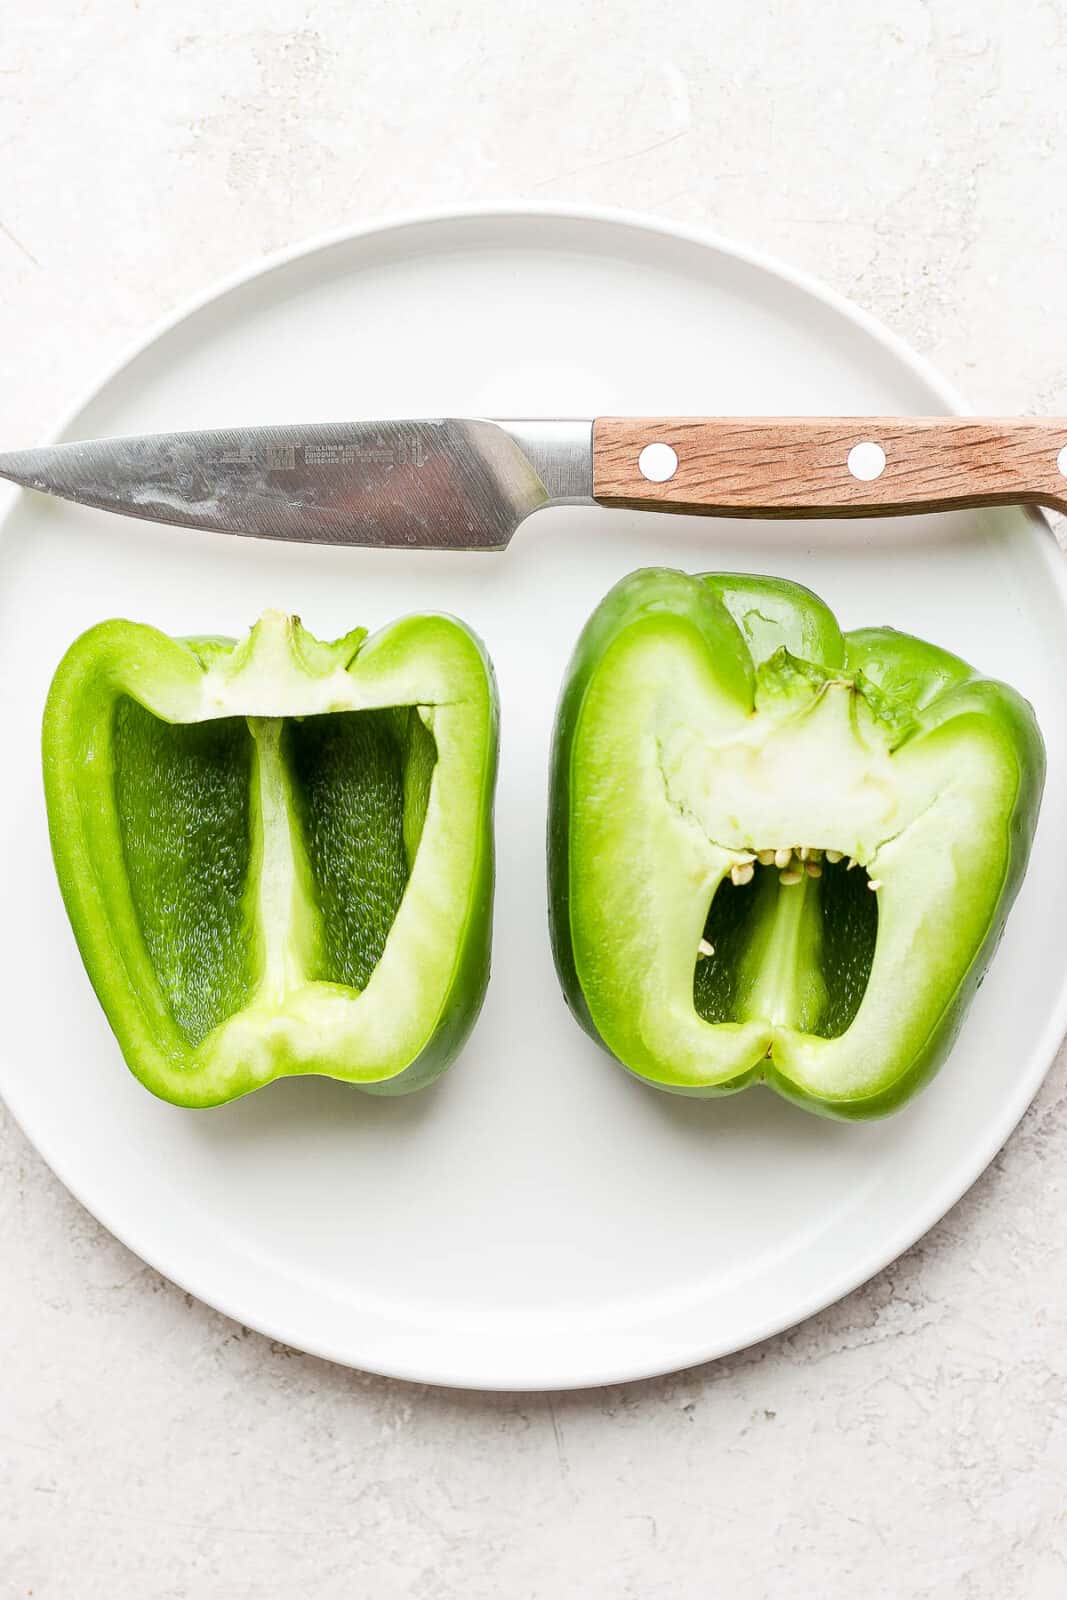 A green bell pepper cut in half on a plate.